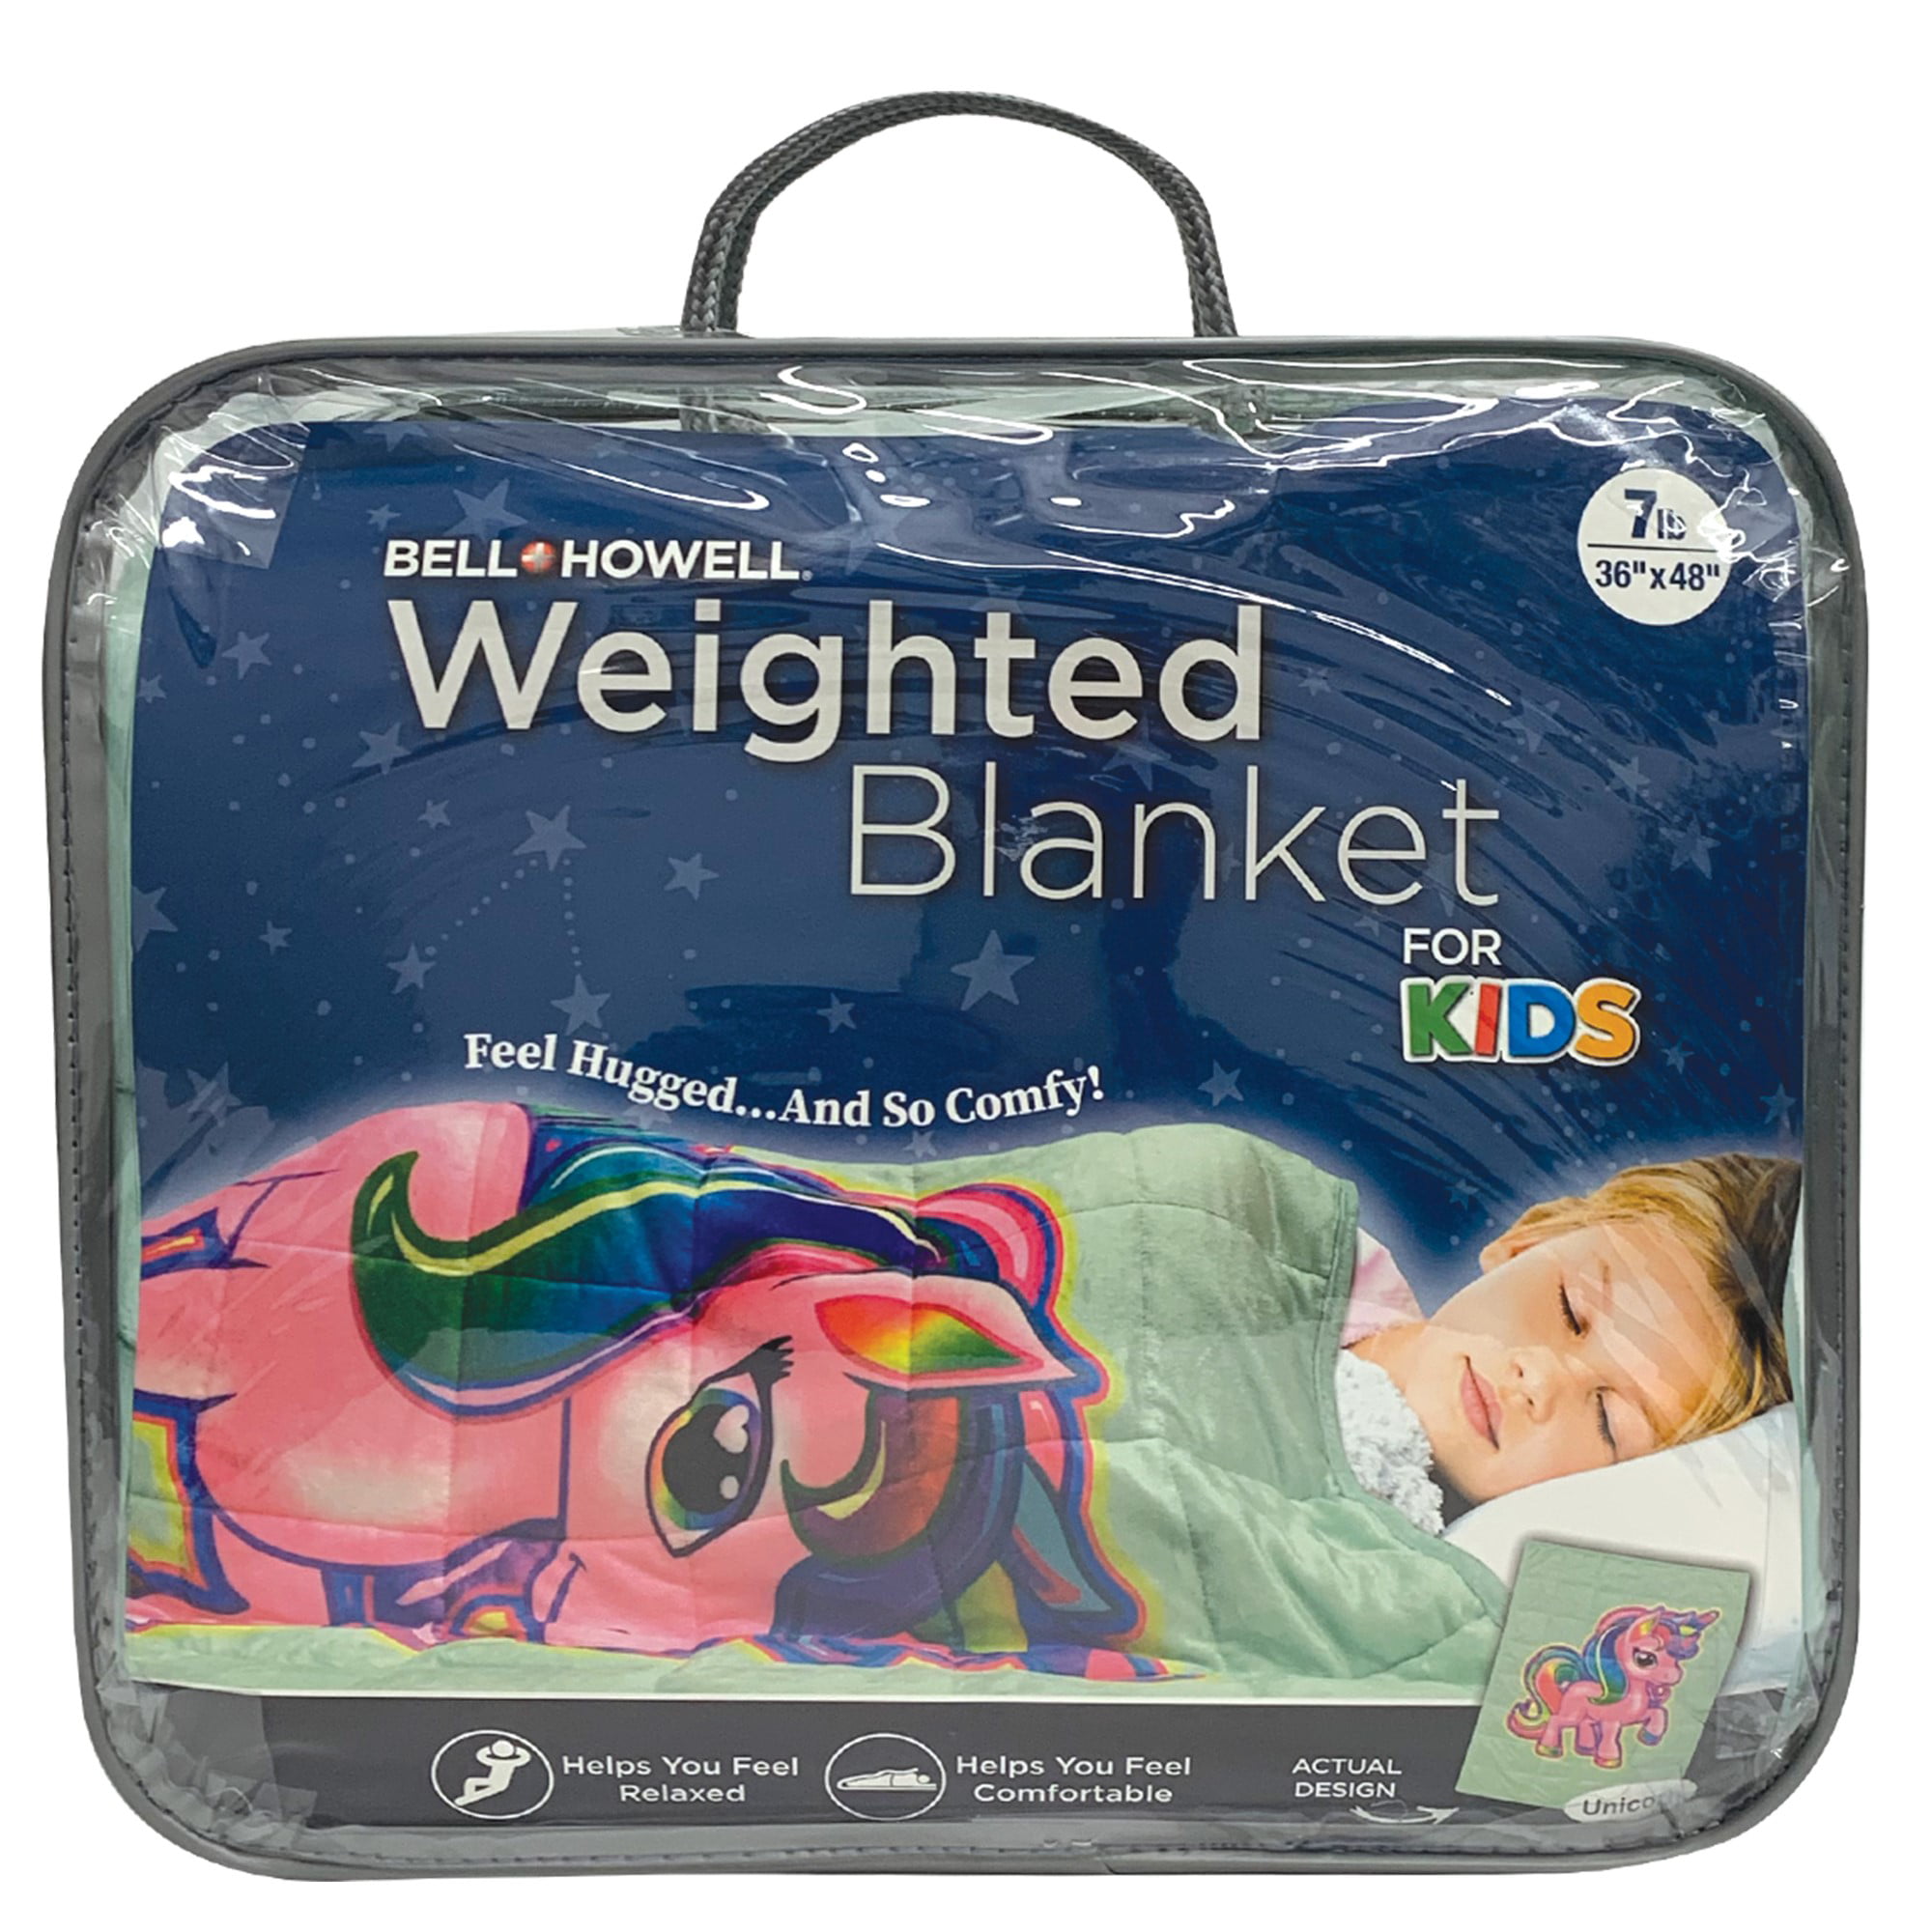 Bell + Howell Kids Weighted Blanket with Glass Beads Filling, 7 lbs